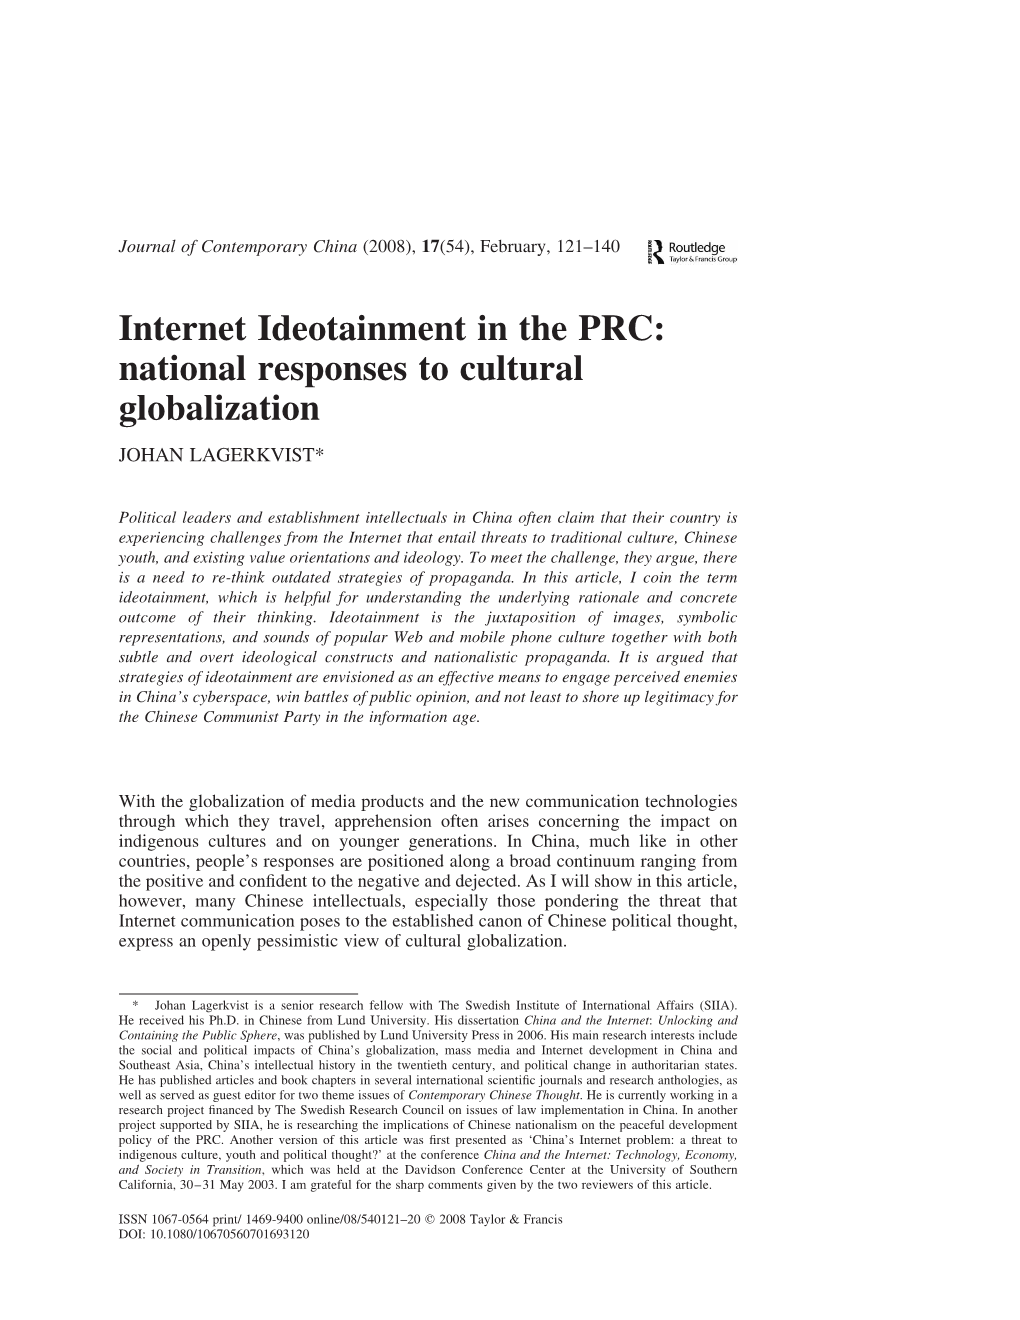 Internet Ideotainment in the PRC: National Responses to Cultural Globalization JOHAN LAGERKVIST*